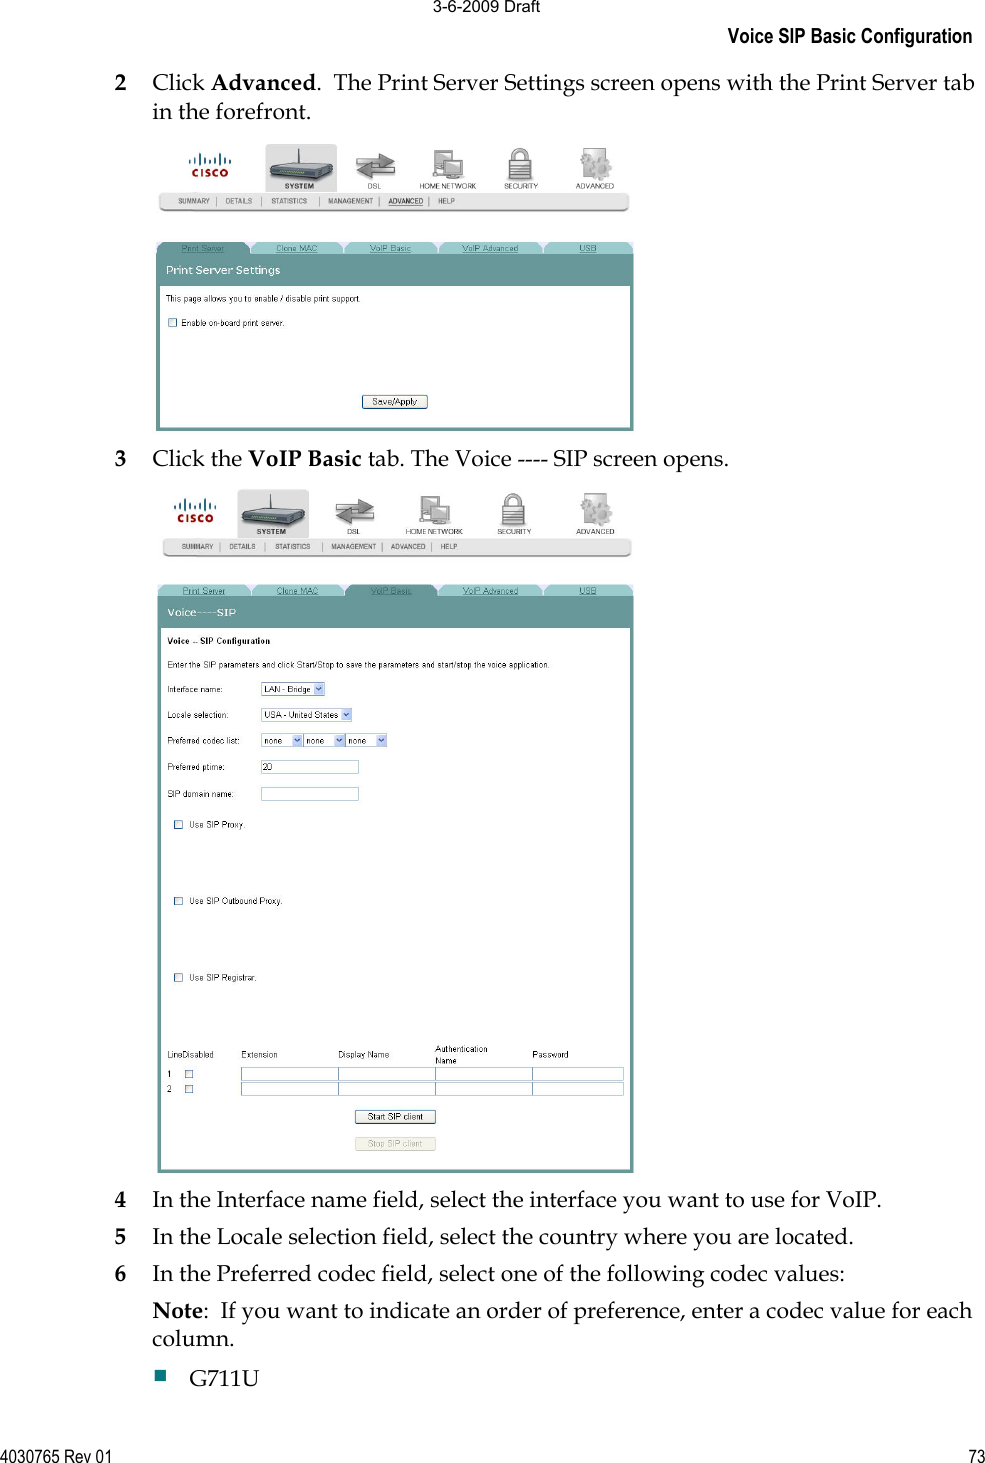 Voice SIP Basic Configuration 4030765 Rev 01 732Click Advanced.  The Print Server Settings screen opens with the Print Server tab in the forefront. 3Click the VoIP Basic tab. The Voice ---- SIP screen opens. 4In the Interface name field, select the interface you want to use for VoIP. 5In the Locale selection field, select the country where you are located. 6In the Preferred codec field, select one of the following codec values:     Note:  If you want to indicate an order of preference, enter a codec value for each column.  G711U 3-6-2009 Draft